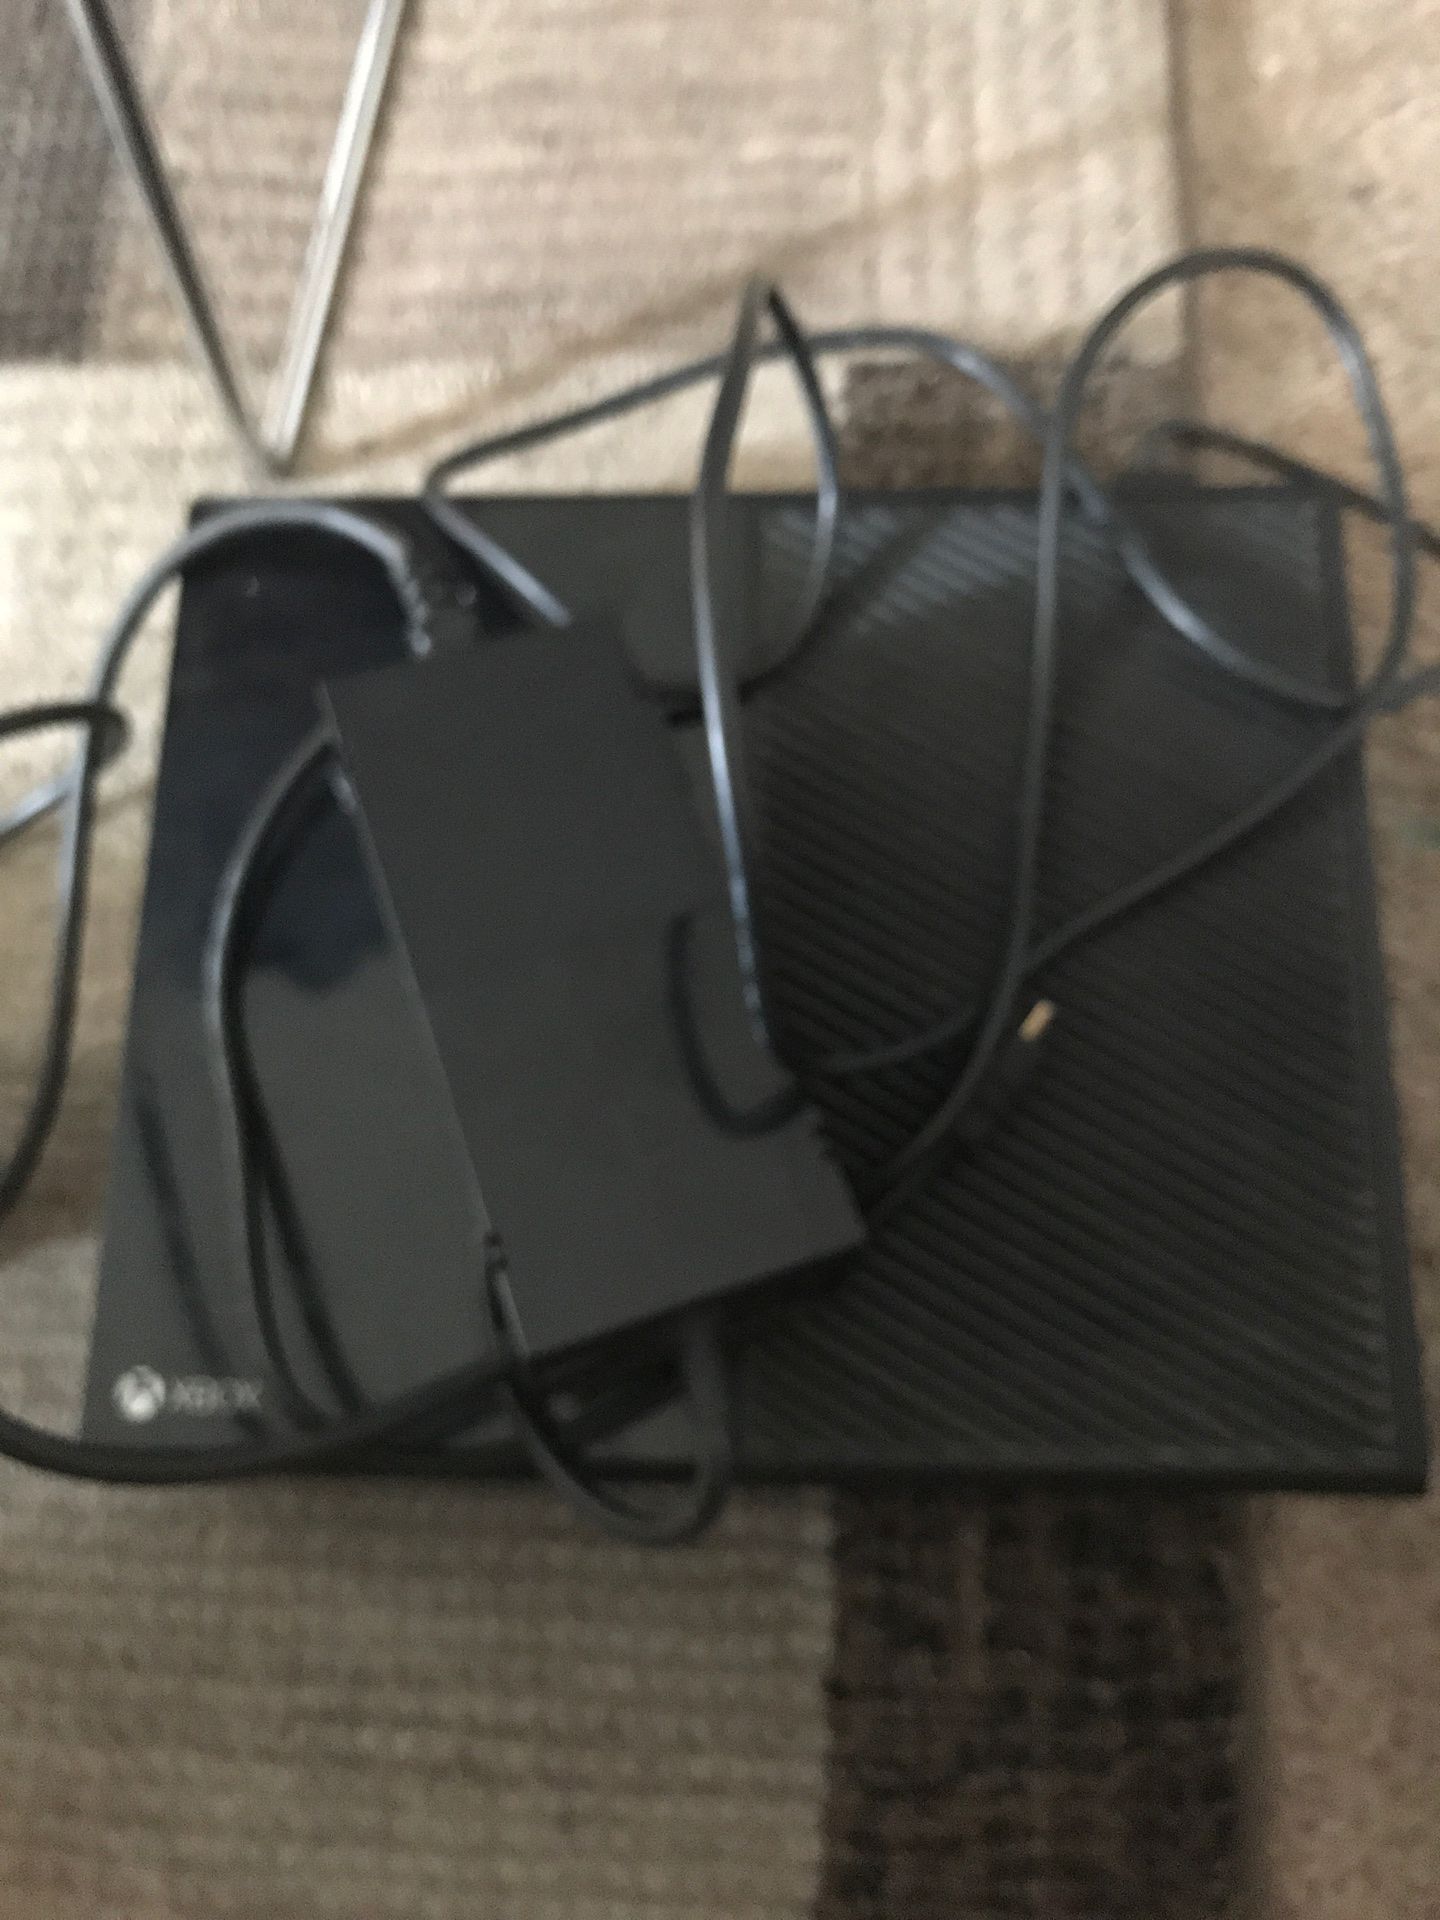 Good Xbox with all cords used